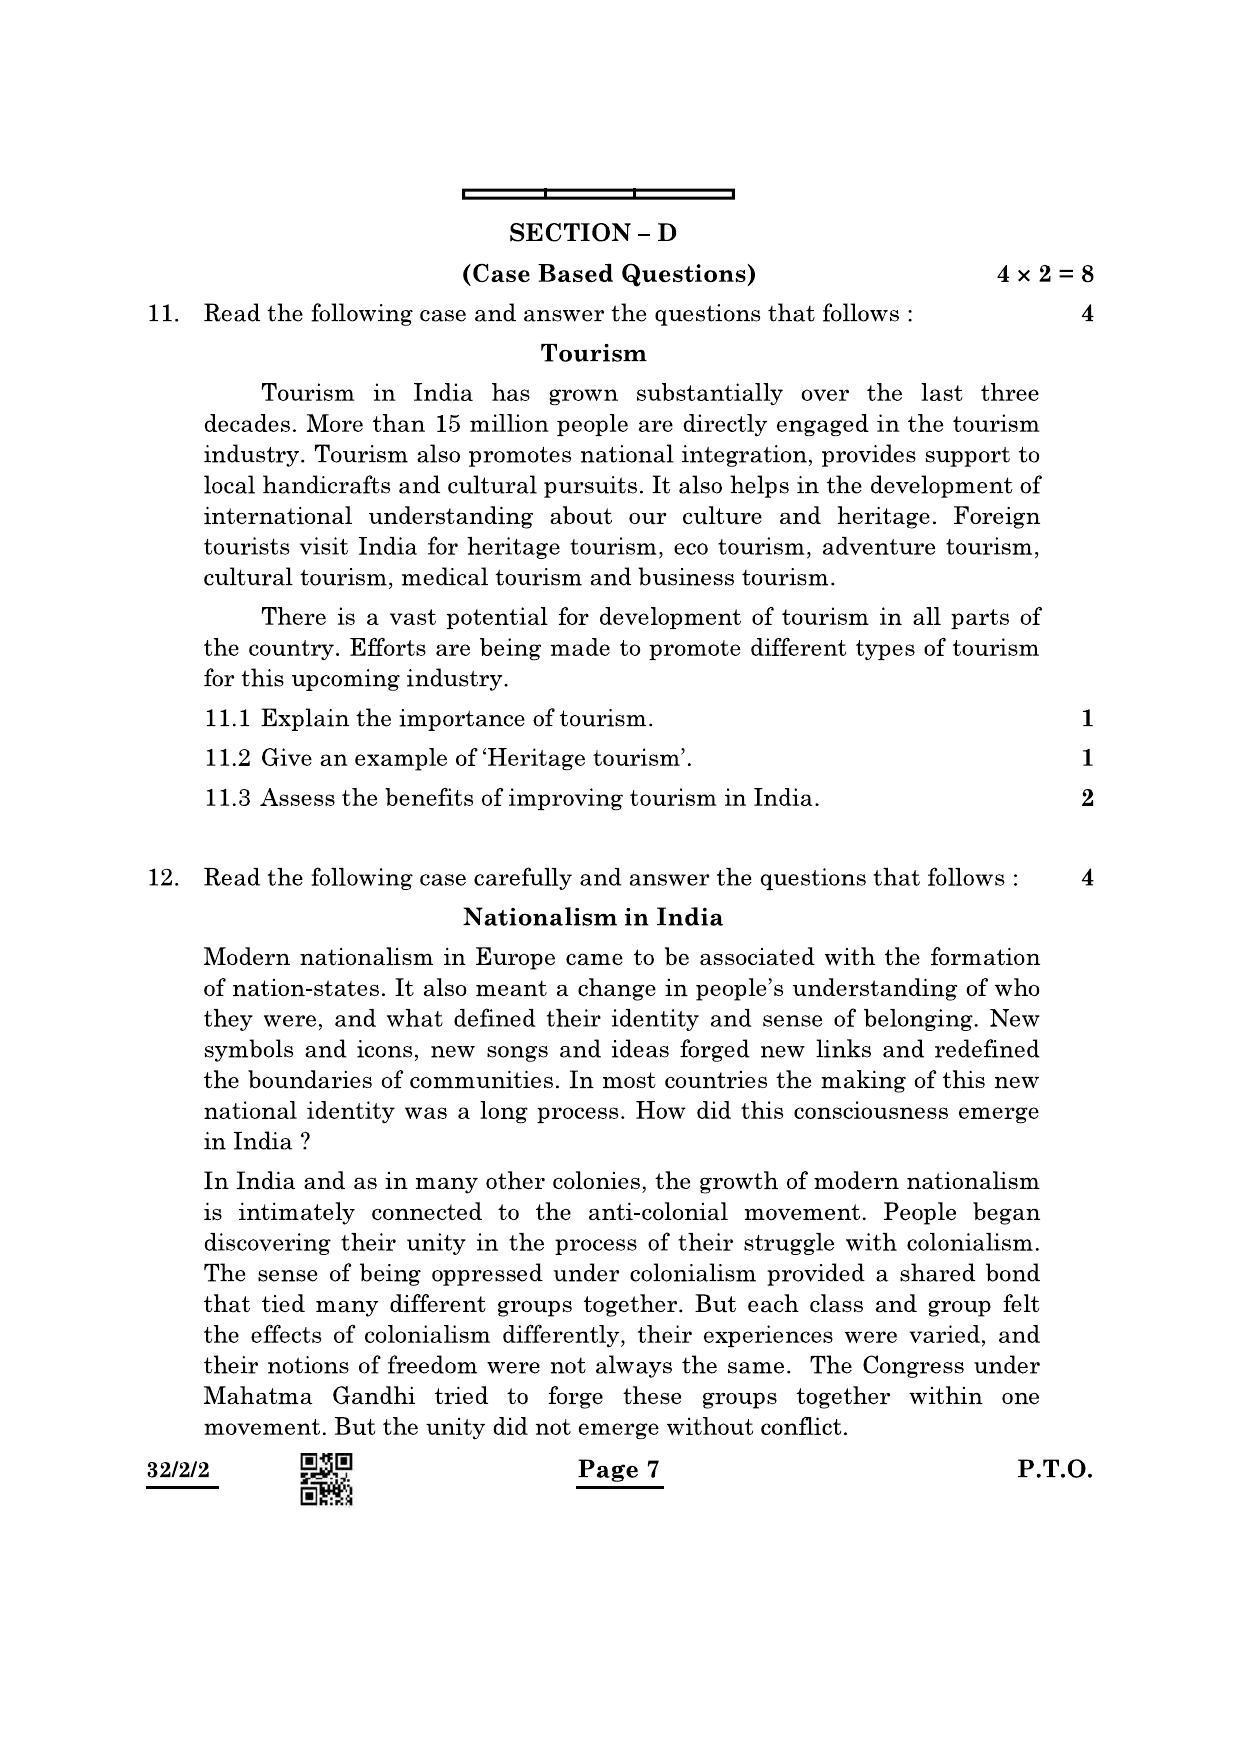 CBSE Class 10 32-2-2 Social Science 2022 Question Paper - Page 7